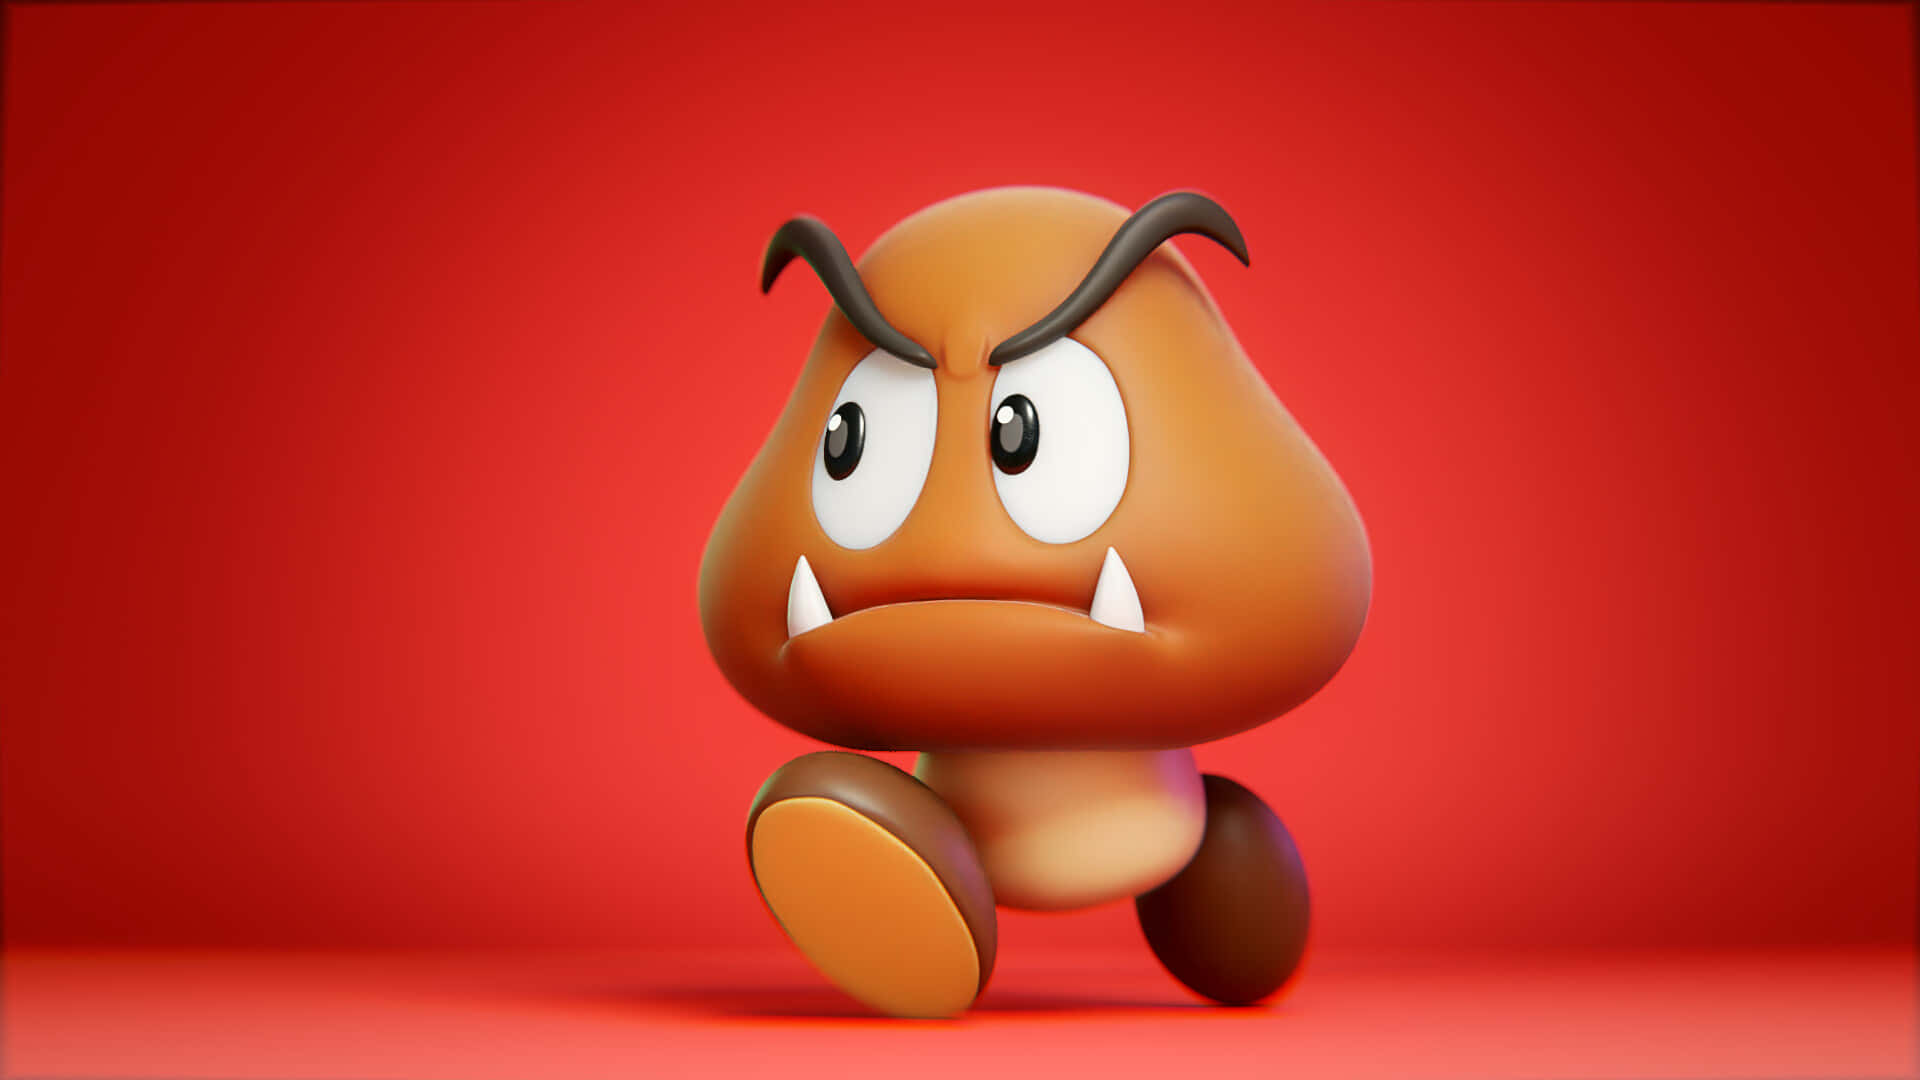 Goomba on a colorful, pixelated background Wallpaper